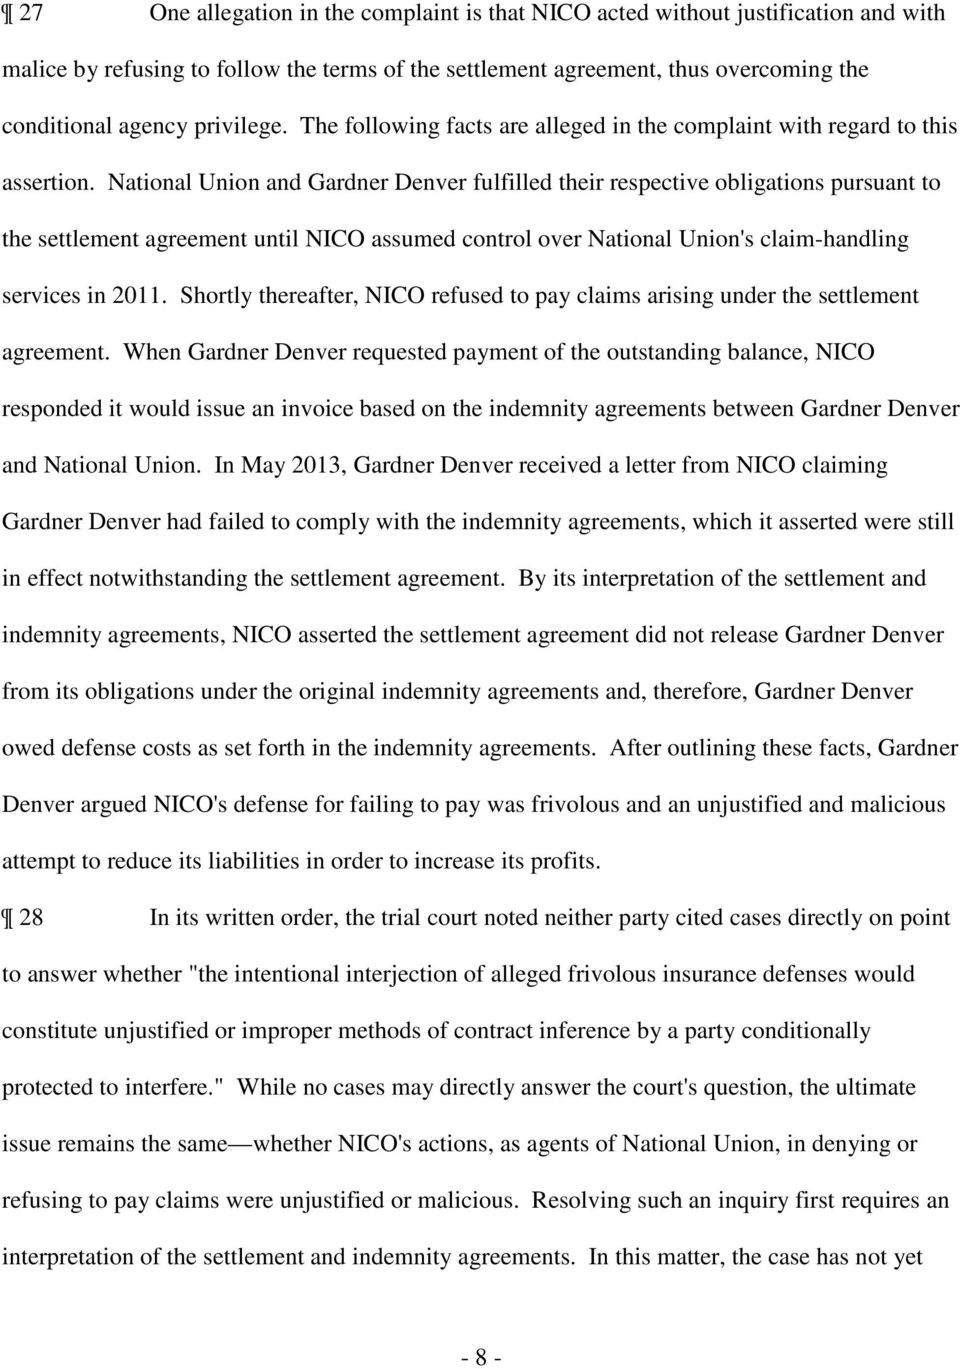 National Union and Gardner Denver fulfilled their respective obligations pursuant to the settlement agreement until NICO assumed control over National Union's claim-handling services in 2011.